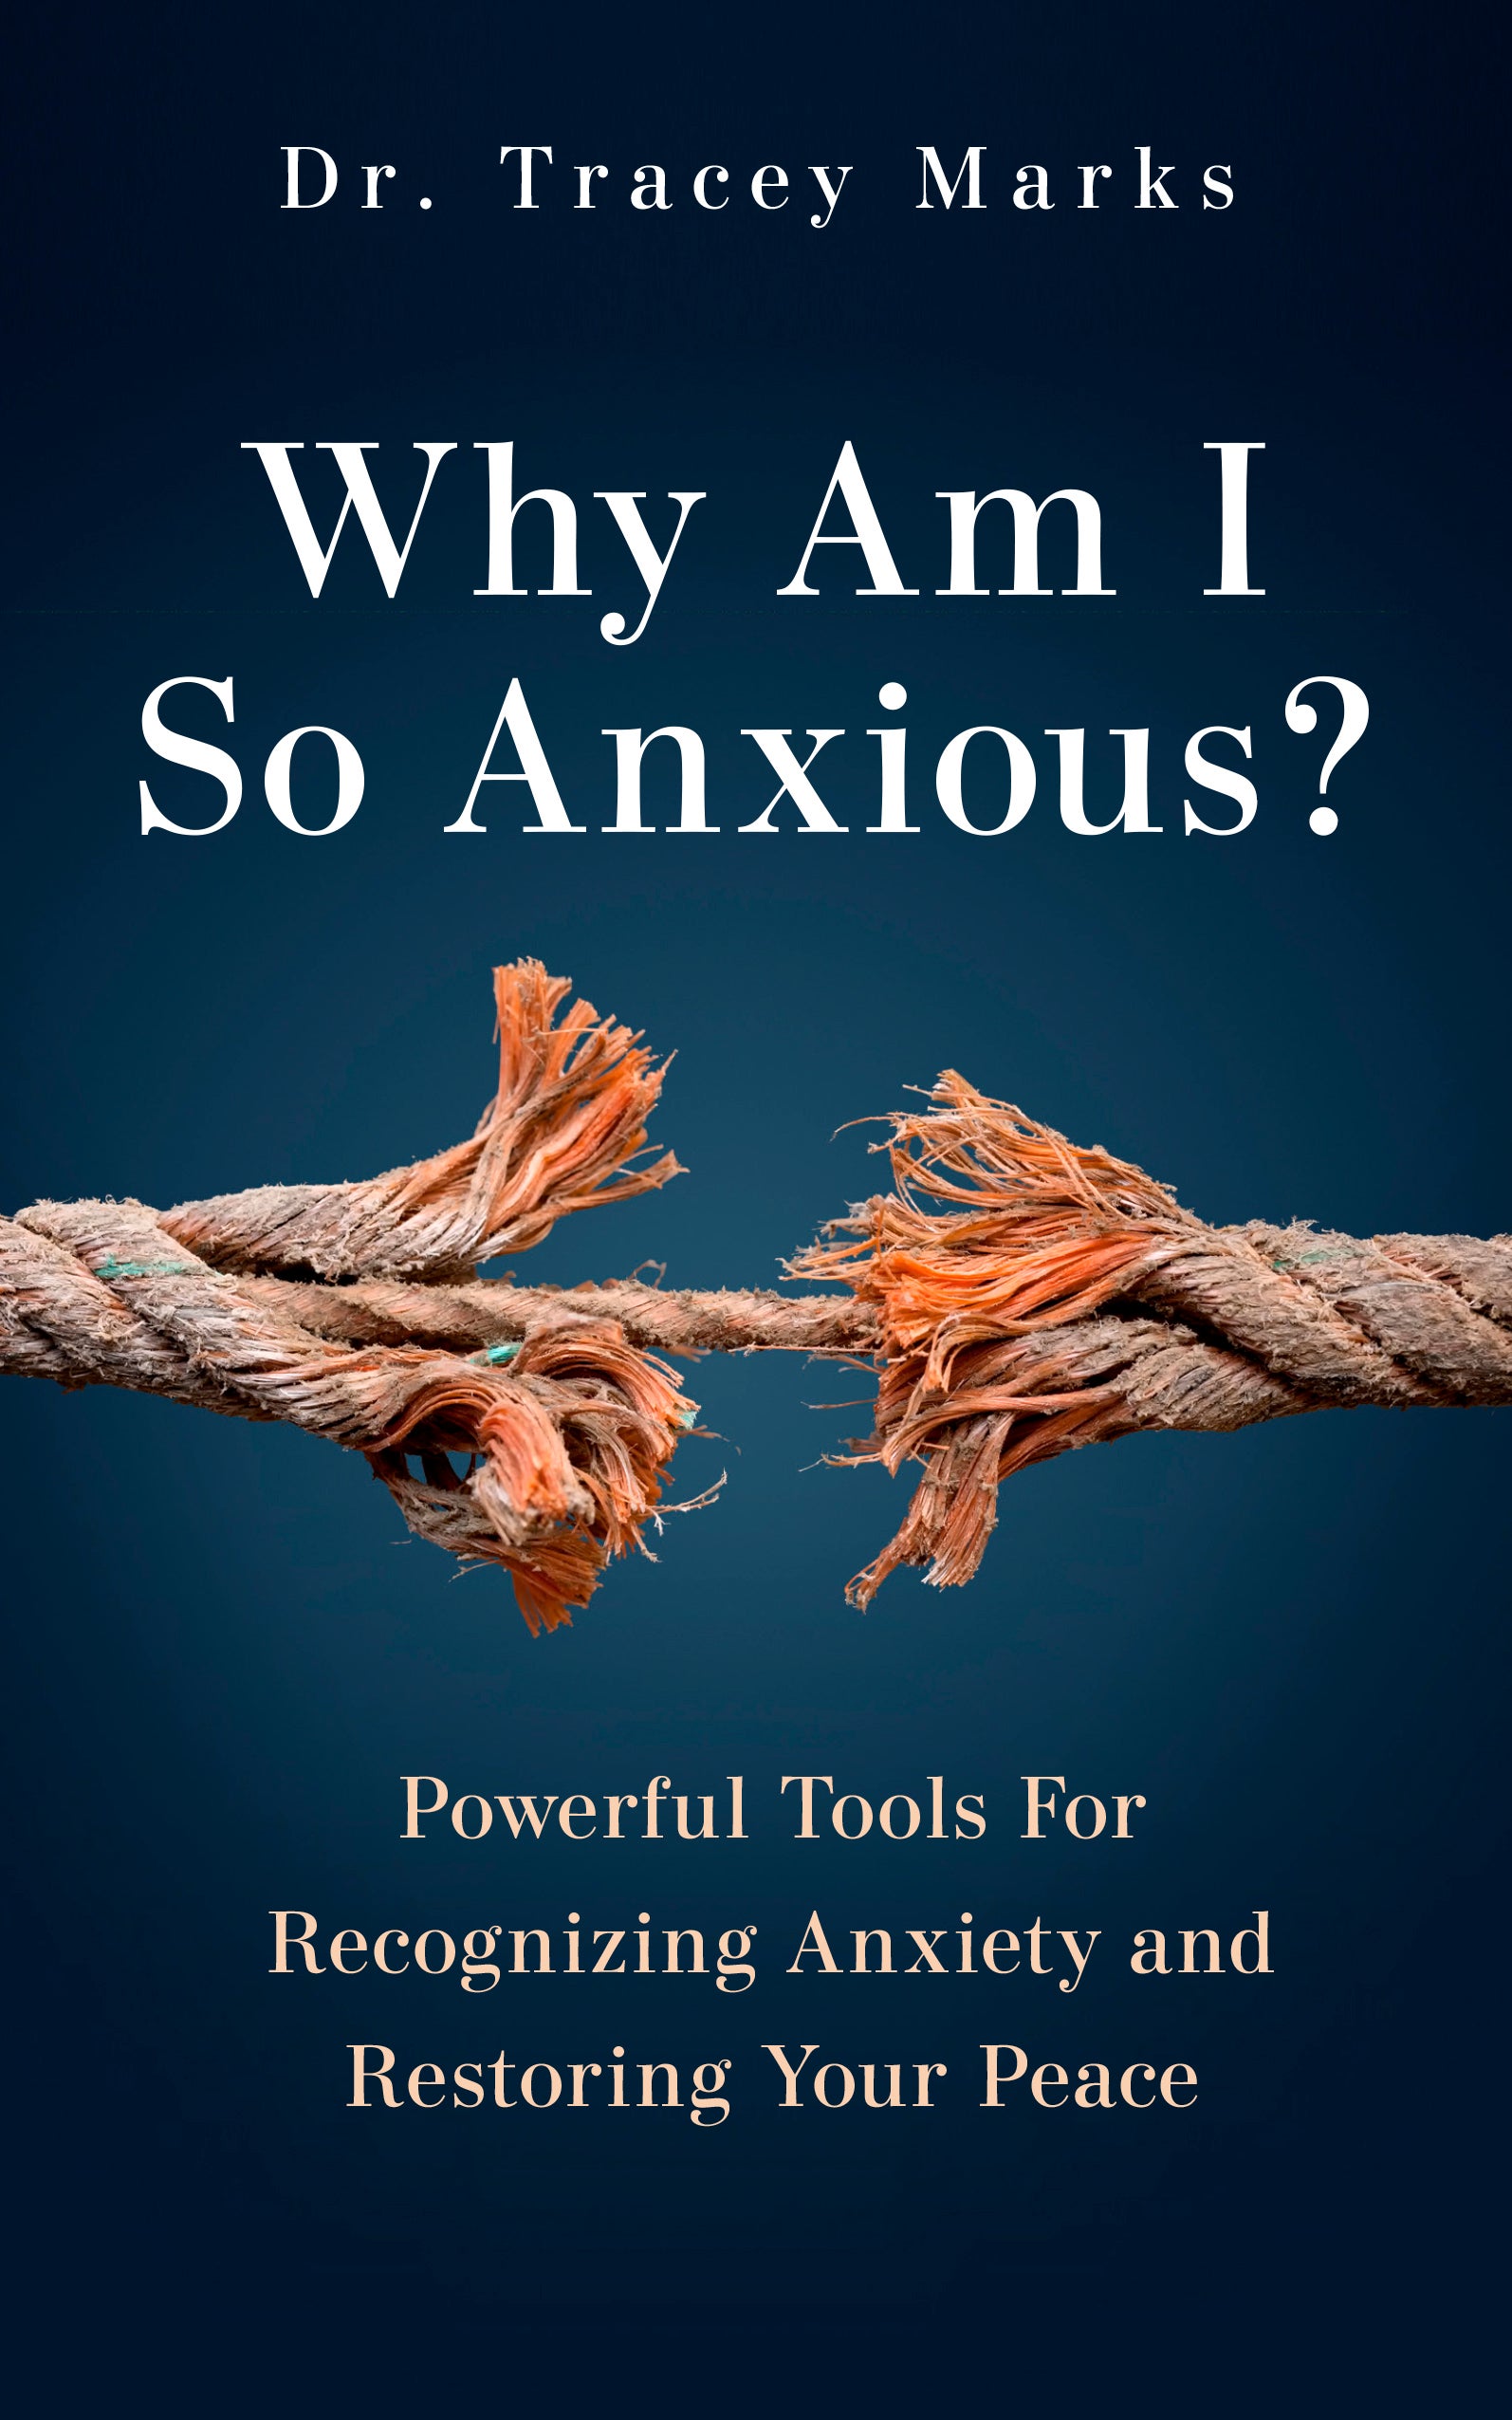 Why Are You Feeling So Anxious These Days?